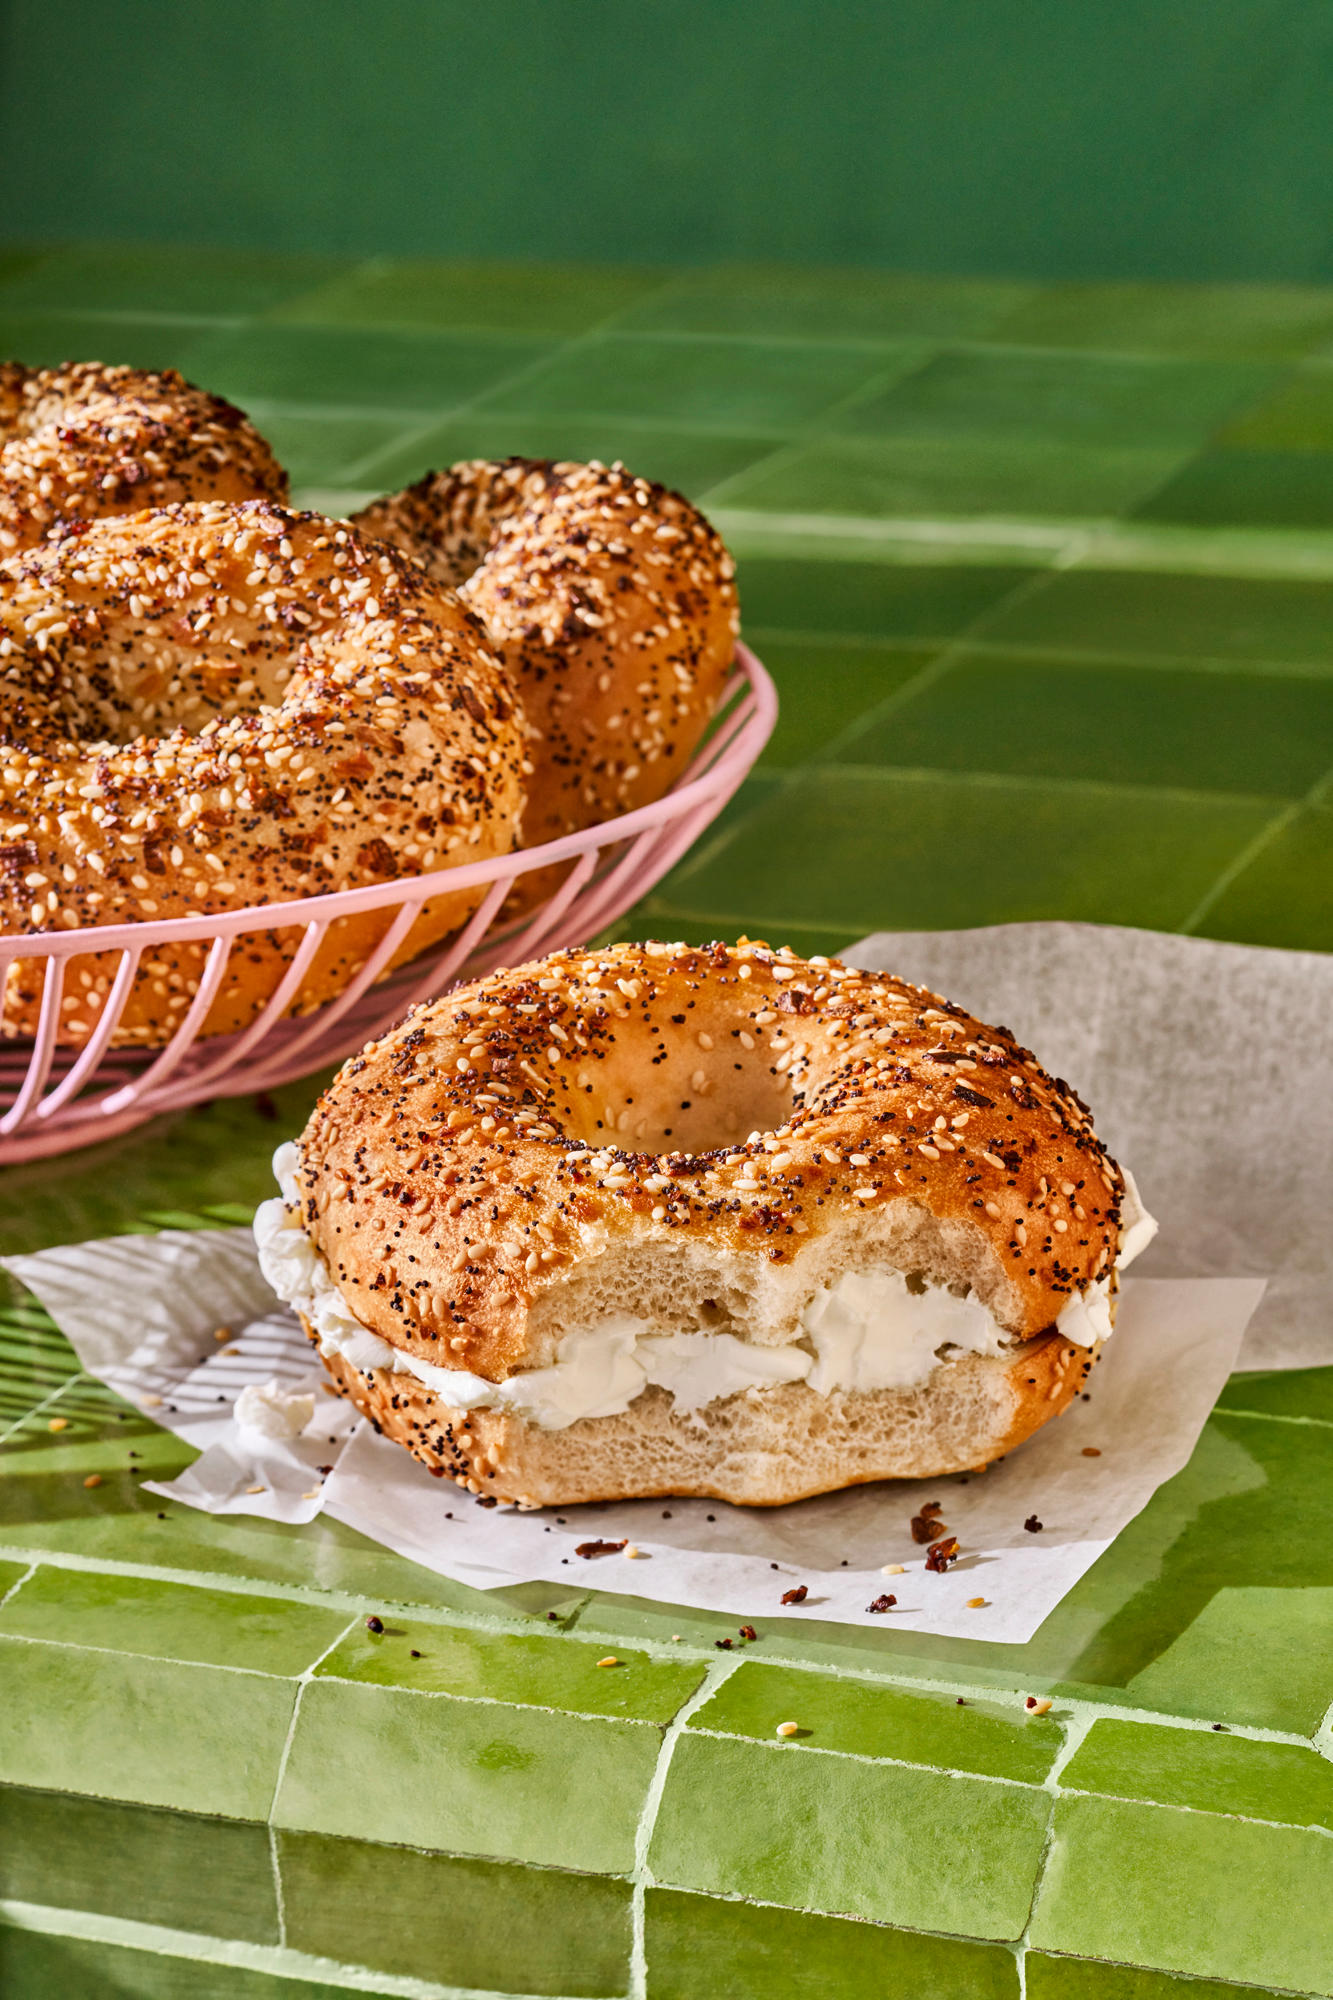 Everything Bagel with Plain Cream Cheese Panera Bread Louisville (502)426-2134